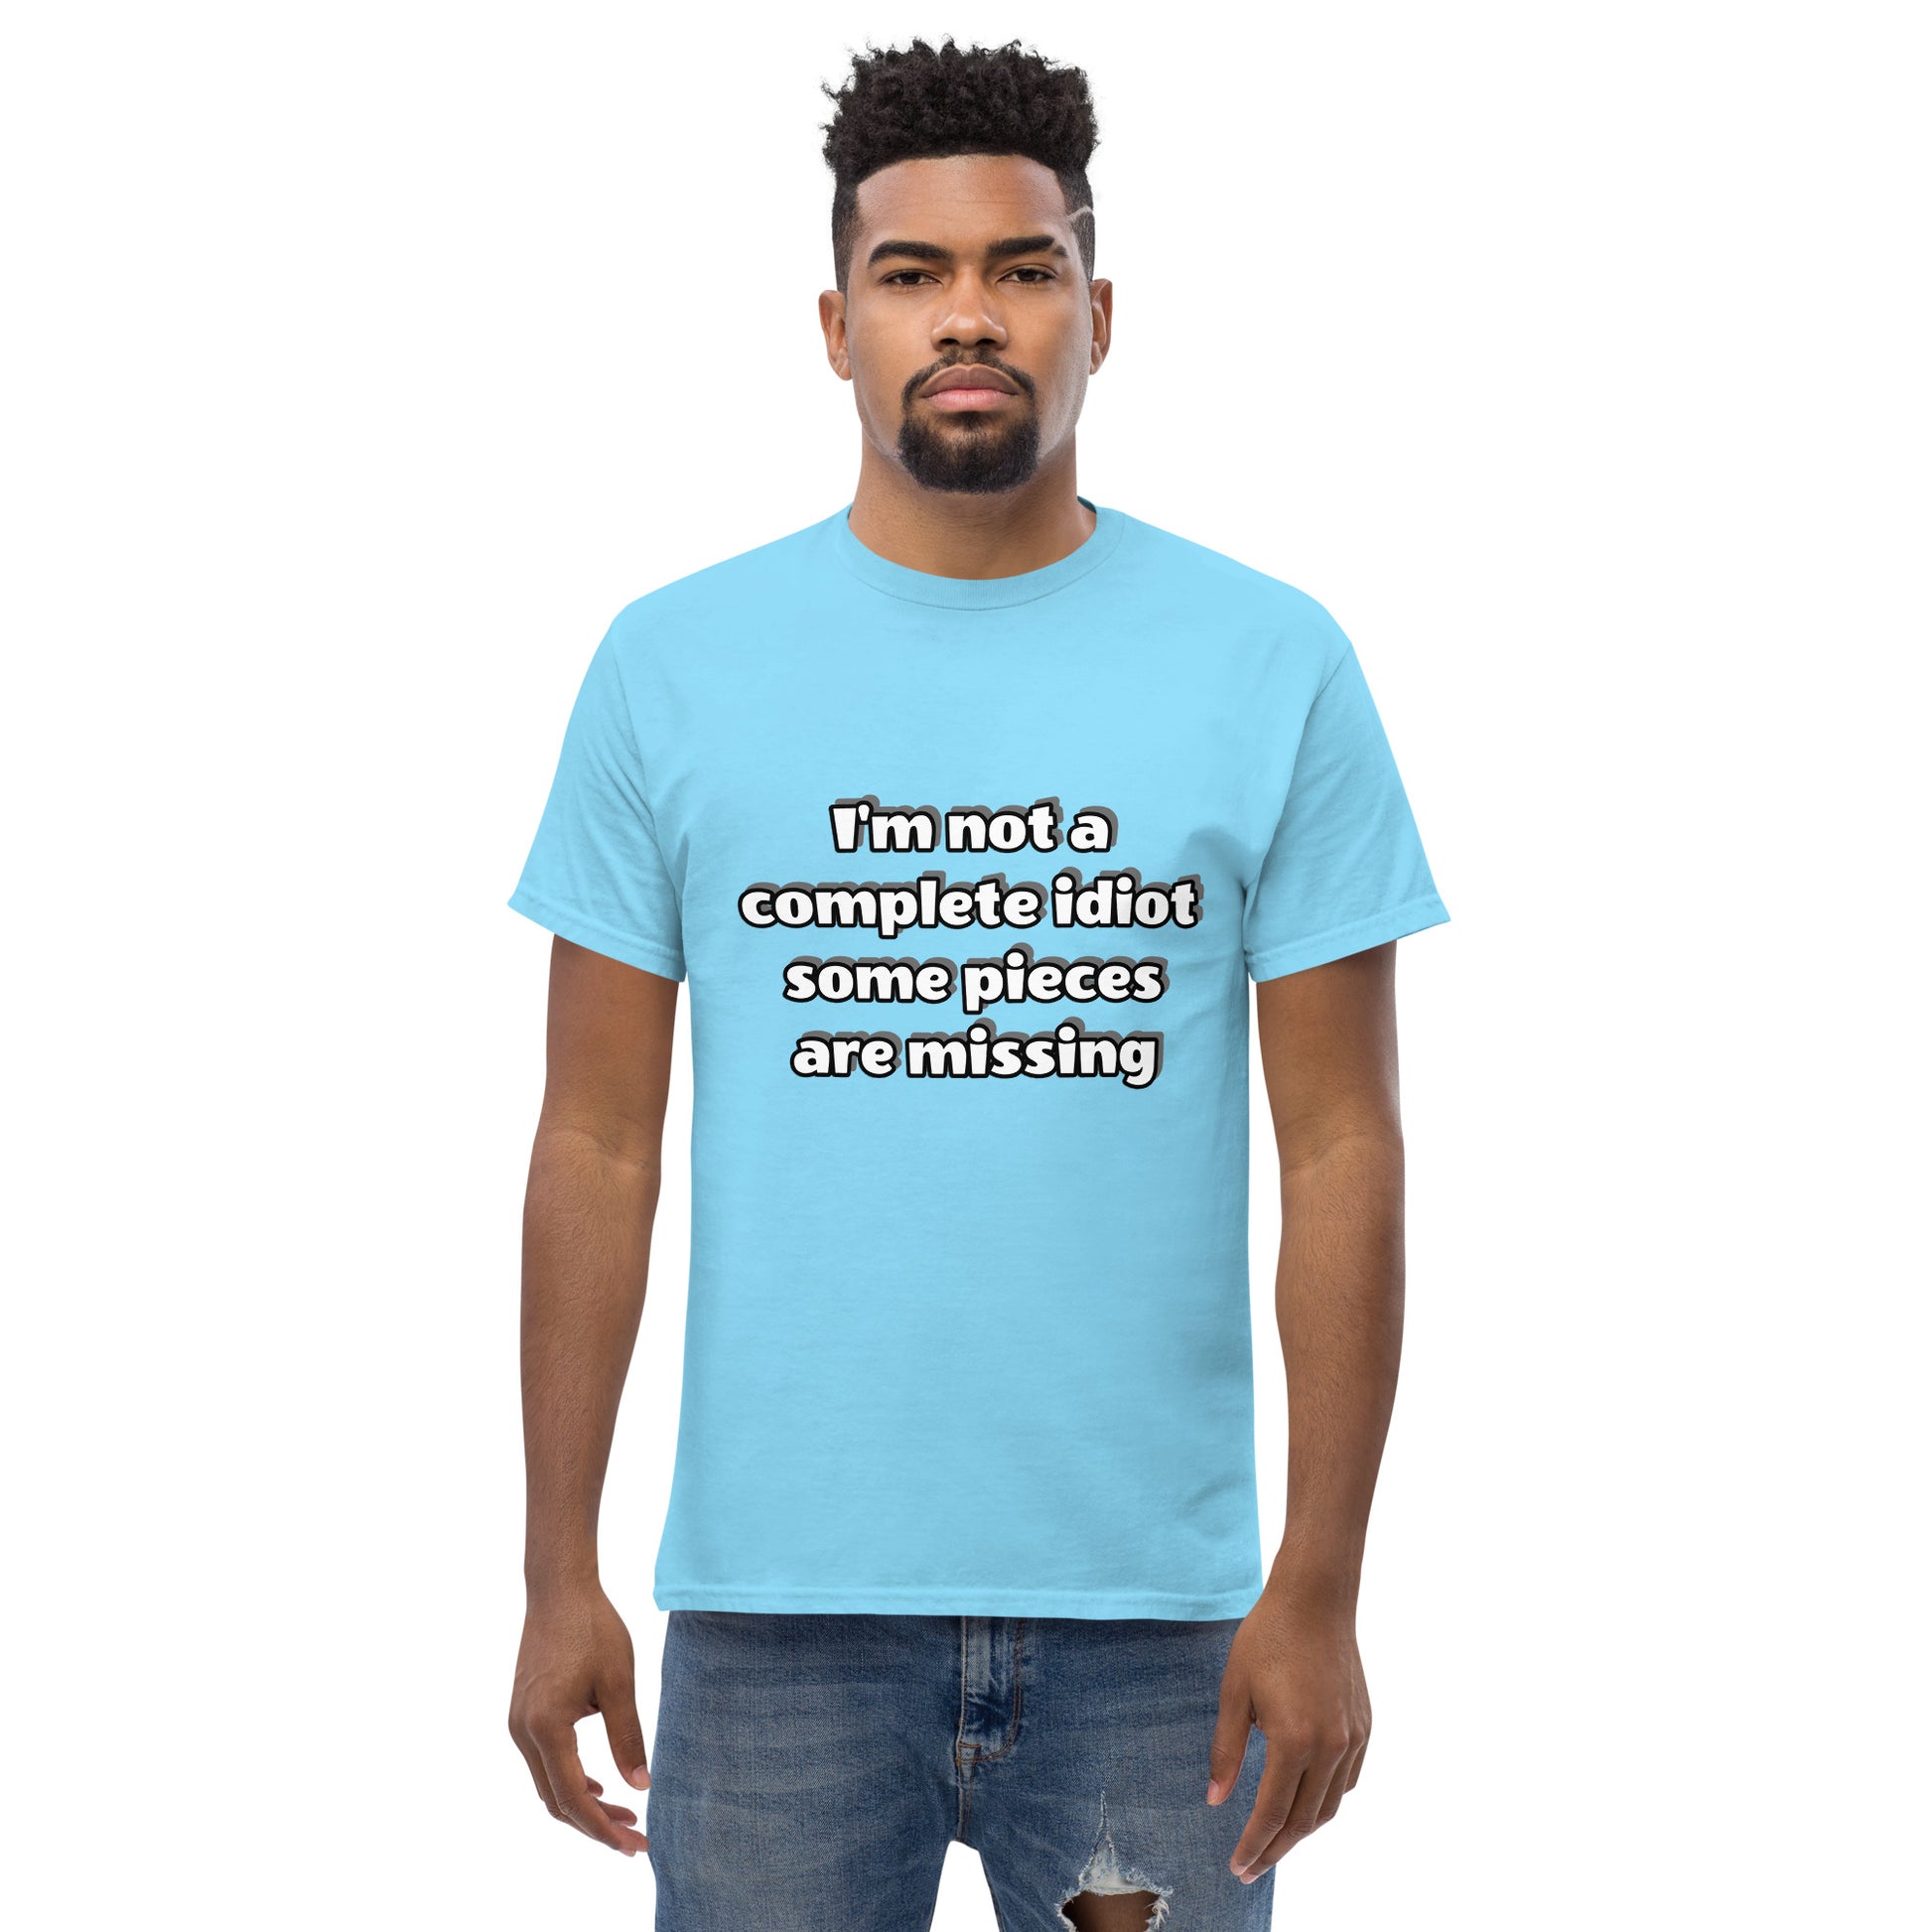 Men with sky blue t-shirt with text “I’m not a complete idiot, some pieces are missing”